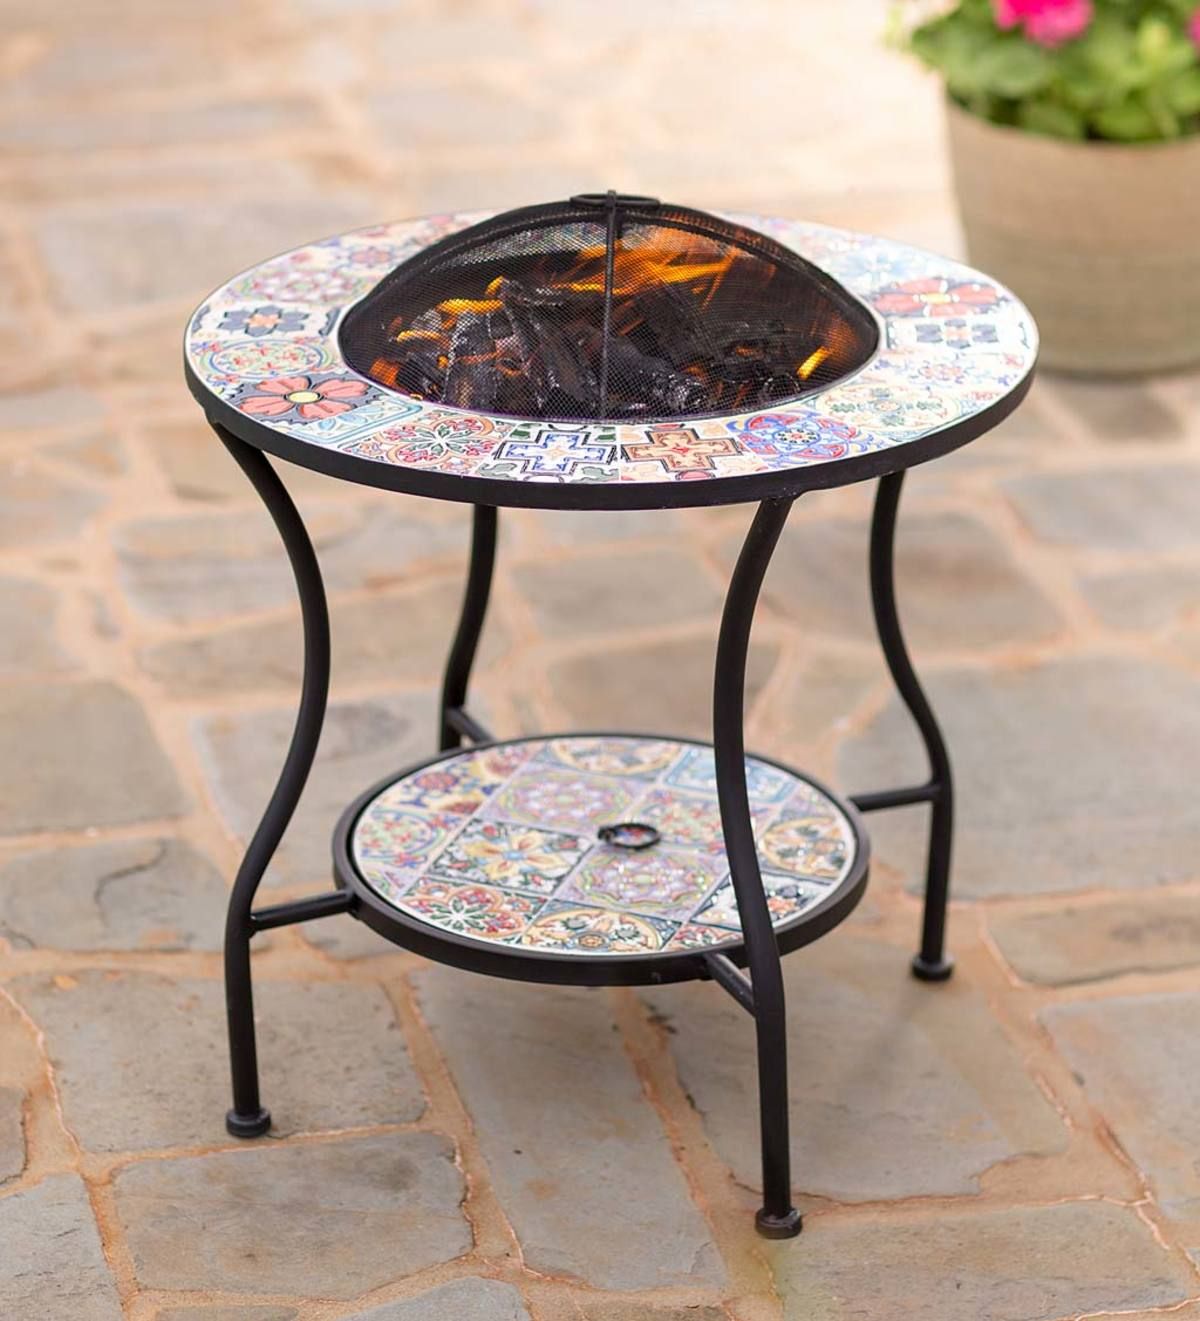 Mosaic Tile Round Outdoor Coffee Table – Mid Century Modern Mosaic Tile Pertaining To Ocean Mosaic Outdoor Accent Tables (View 2 of 15)